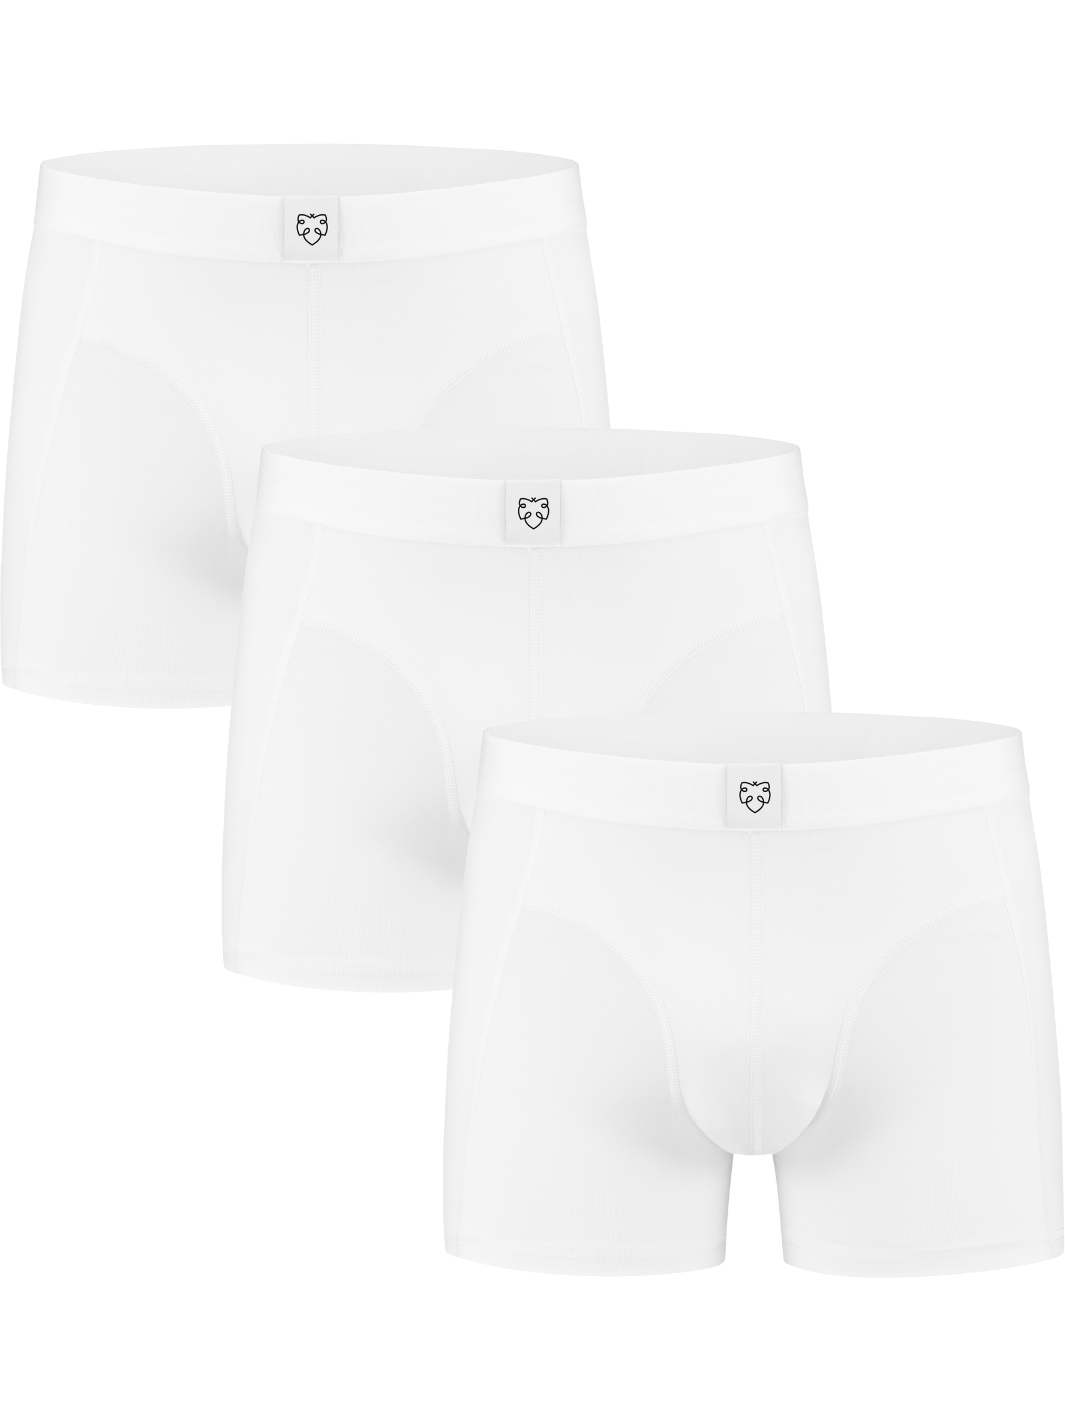 3 PACK - Men's boxer shorts made of organic cotton A-dam white